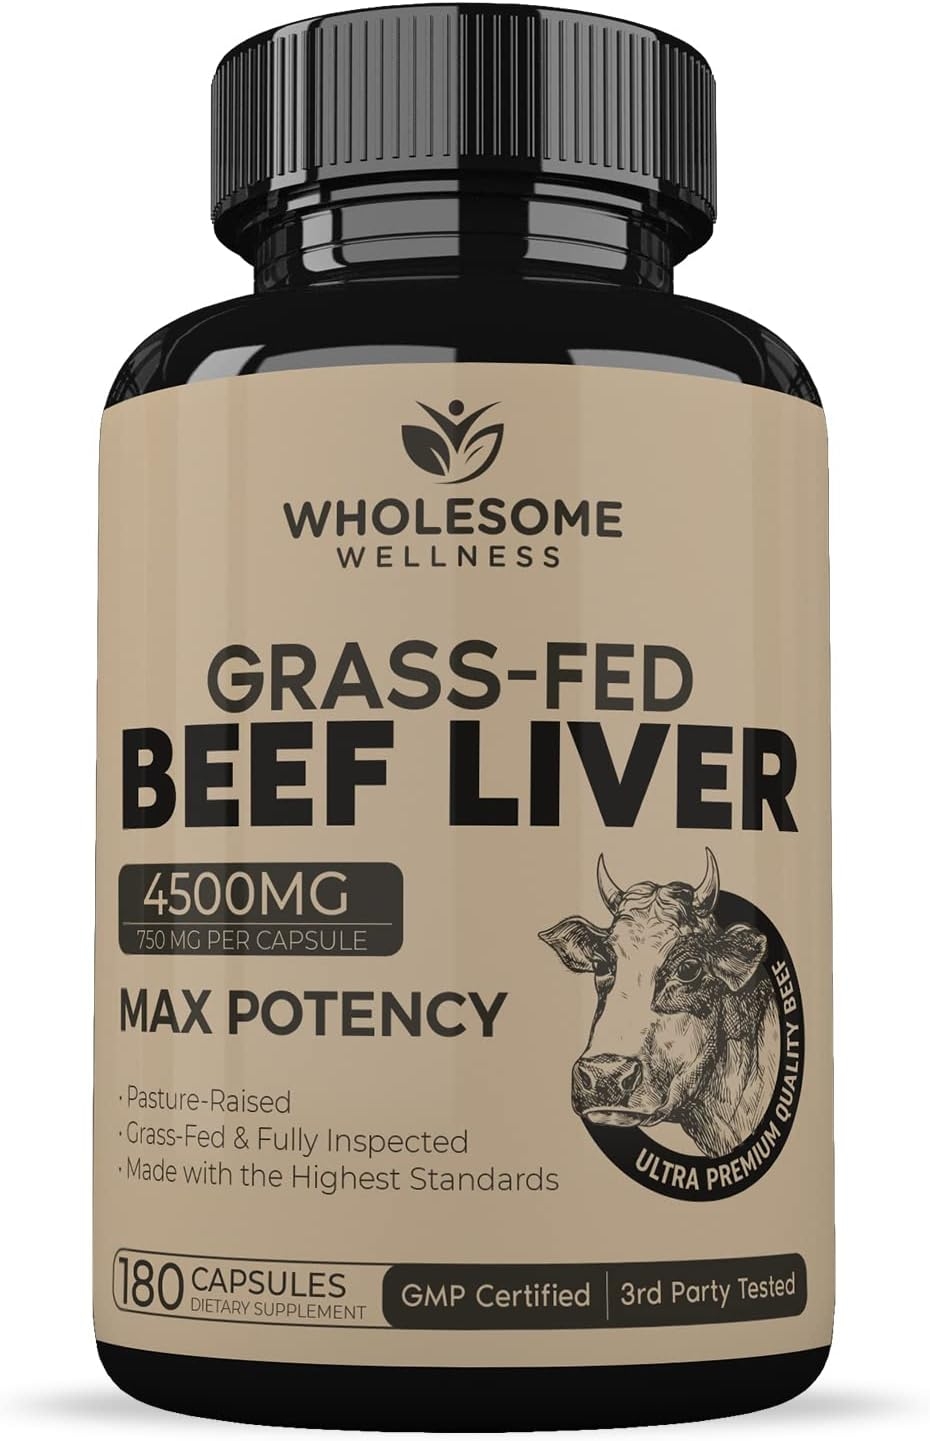 Grass Fed Desiccated Beef Liver Capsules (180 Pills, 750mg Each) - Natural Iron, Vitamin A, B12 for Energy - Humanely Pasture Raised Undefatted in New Zealand Without Hormones or Chemicals